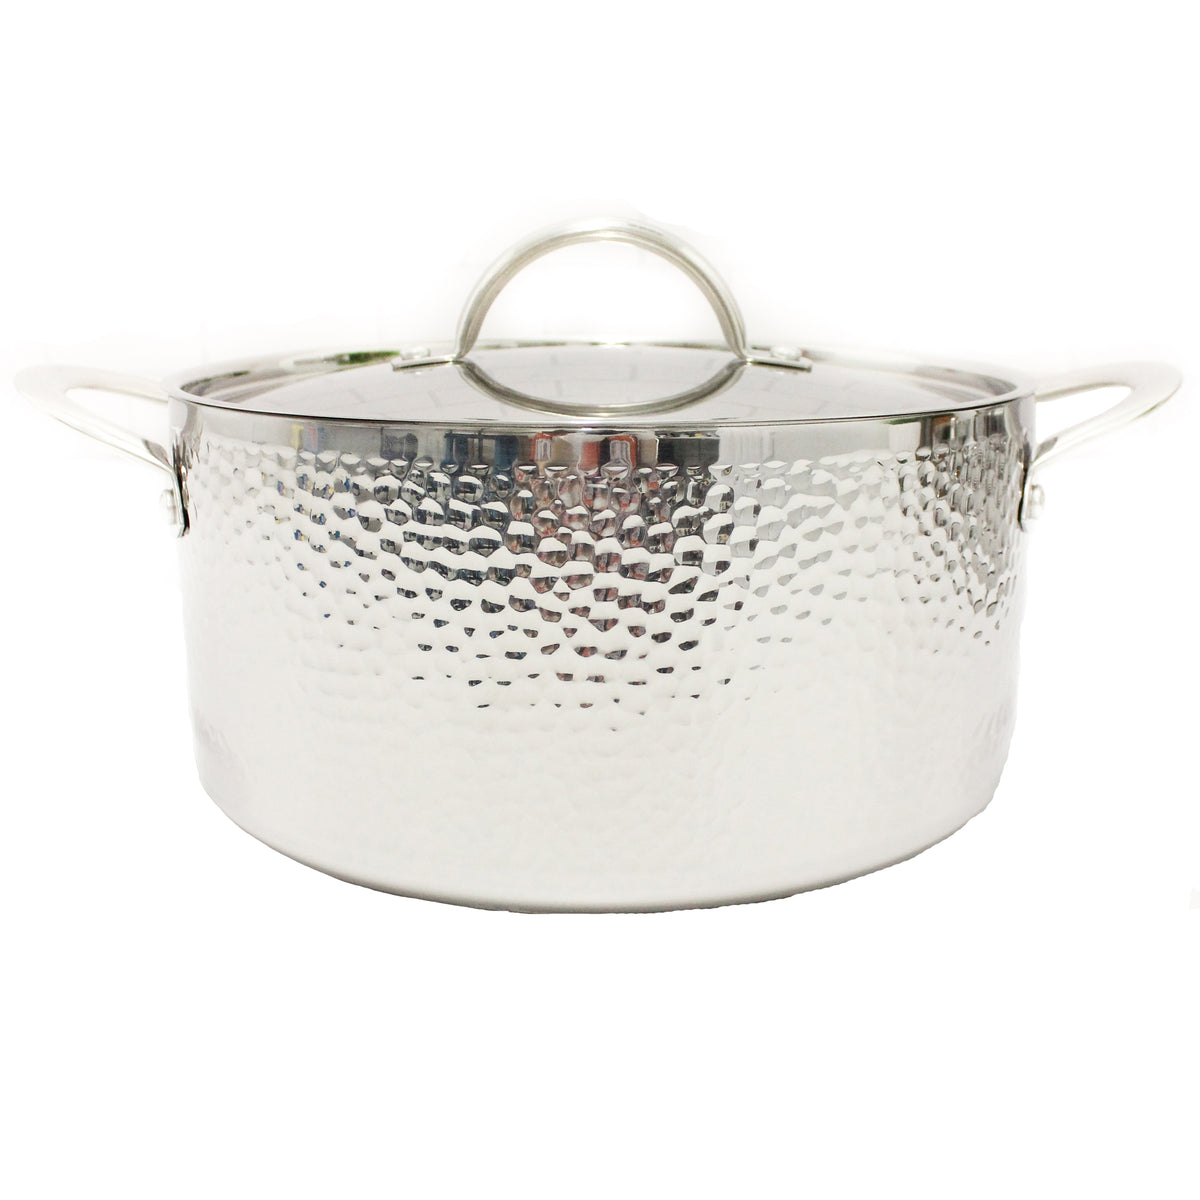 Good Grips Tri-Ply Stainless Steel 5 qt. Covered Casserole Dutch Oven